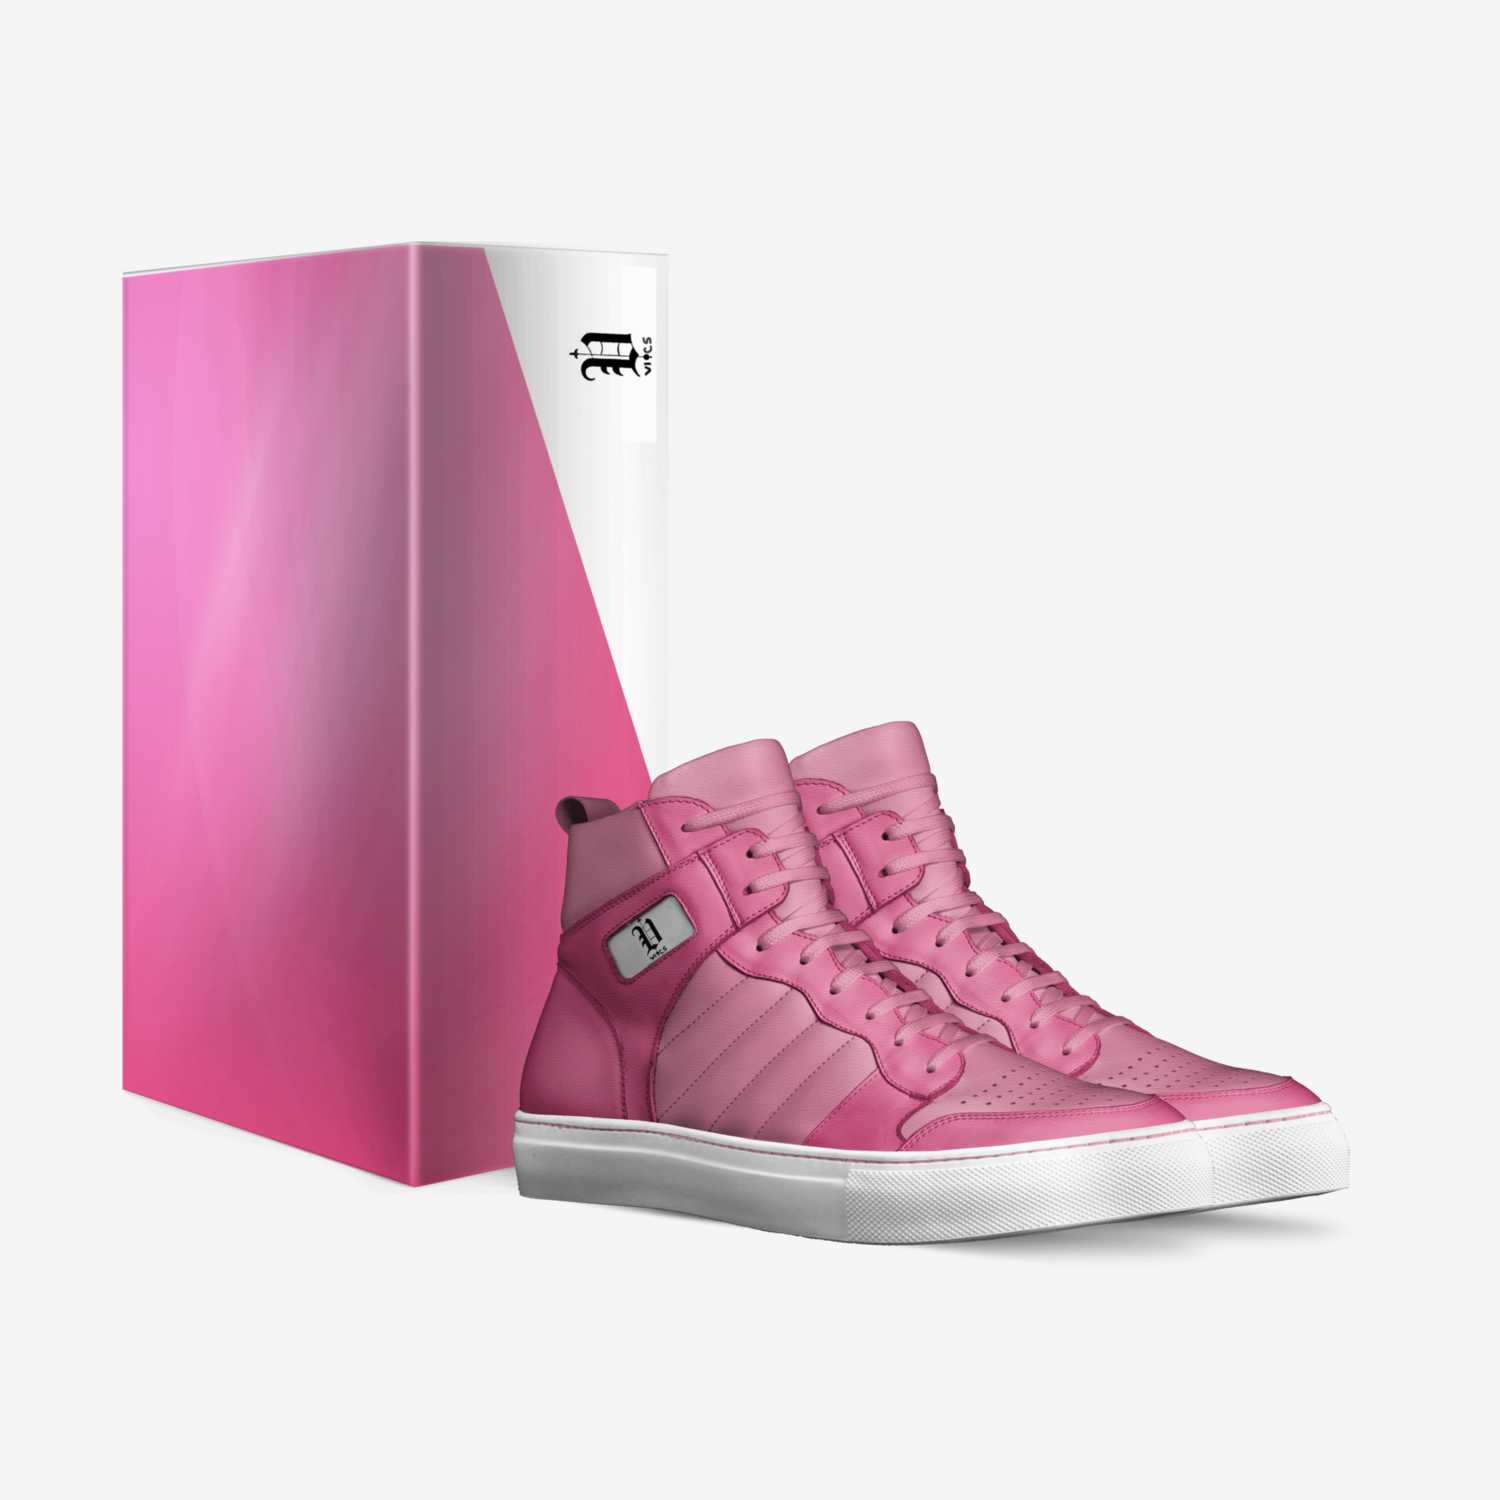 Vics pink custom made in Italy shoes by Brayden Murphy | Box view